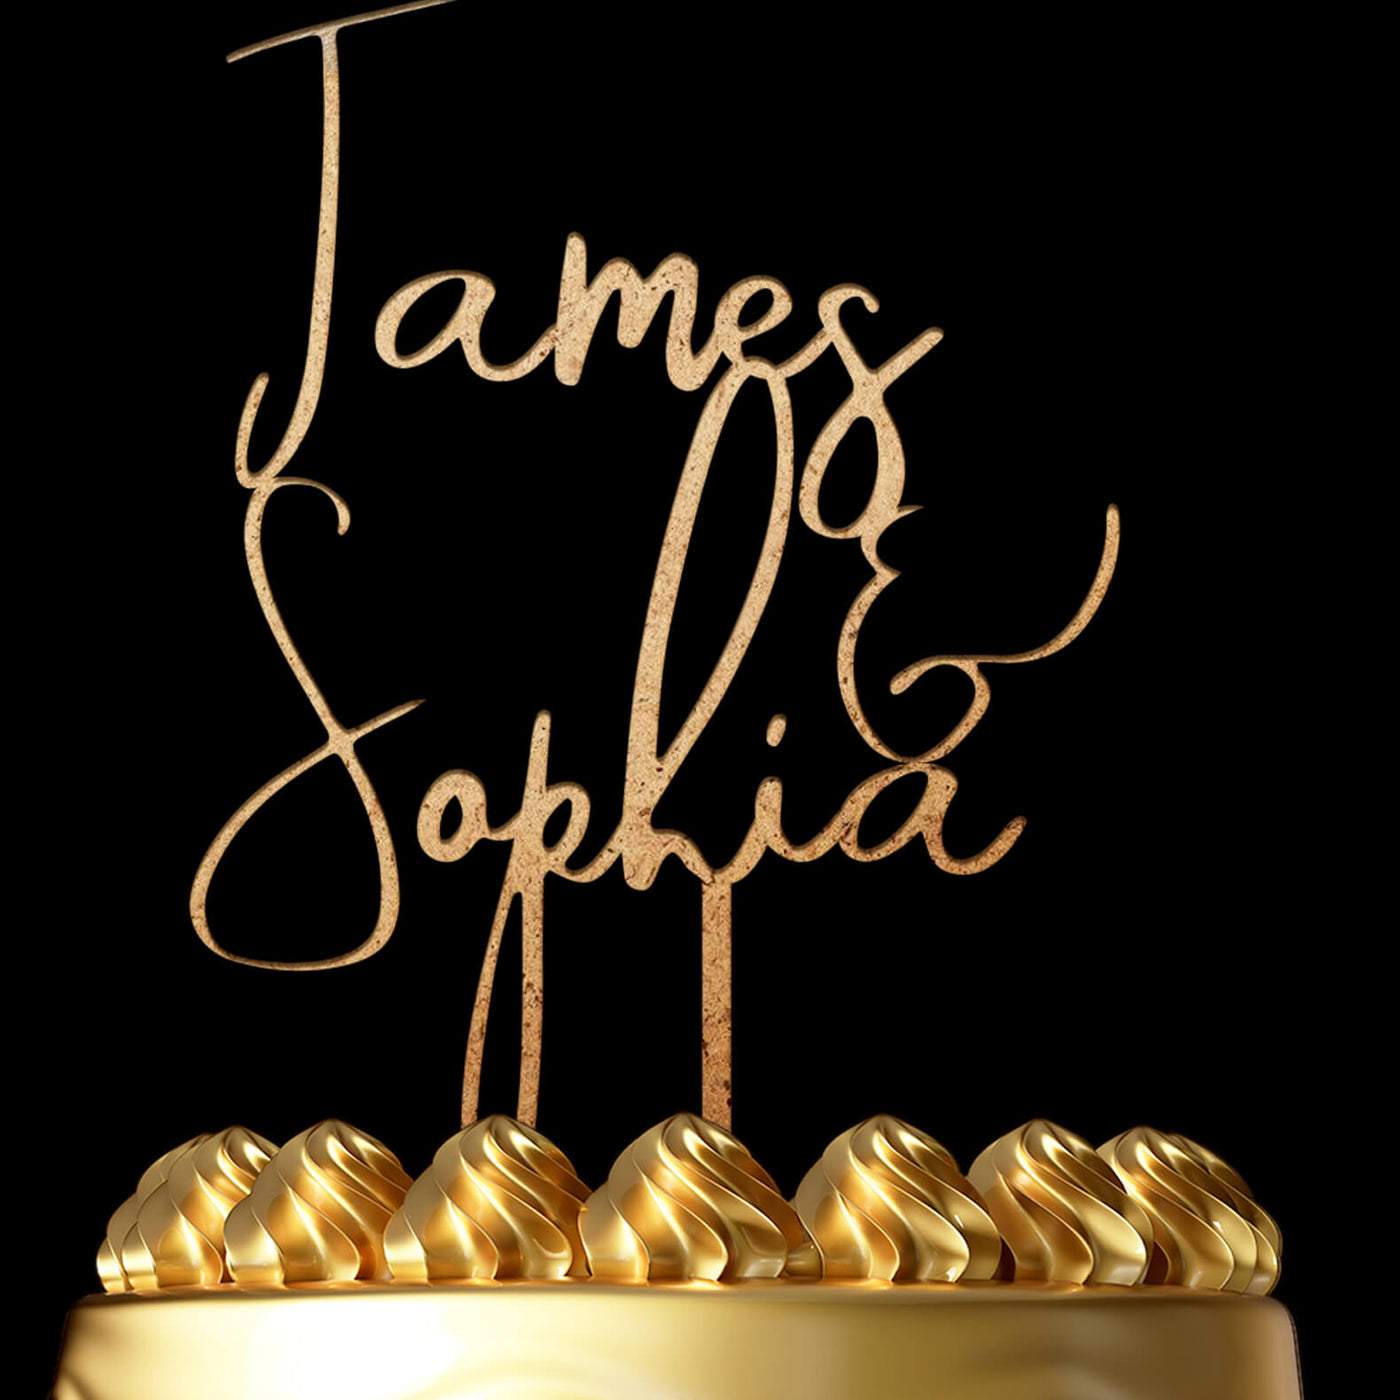 Personalized Cake Topper James - Wedding Cake Topper by Luxtomi